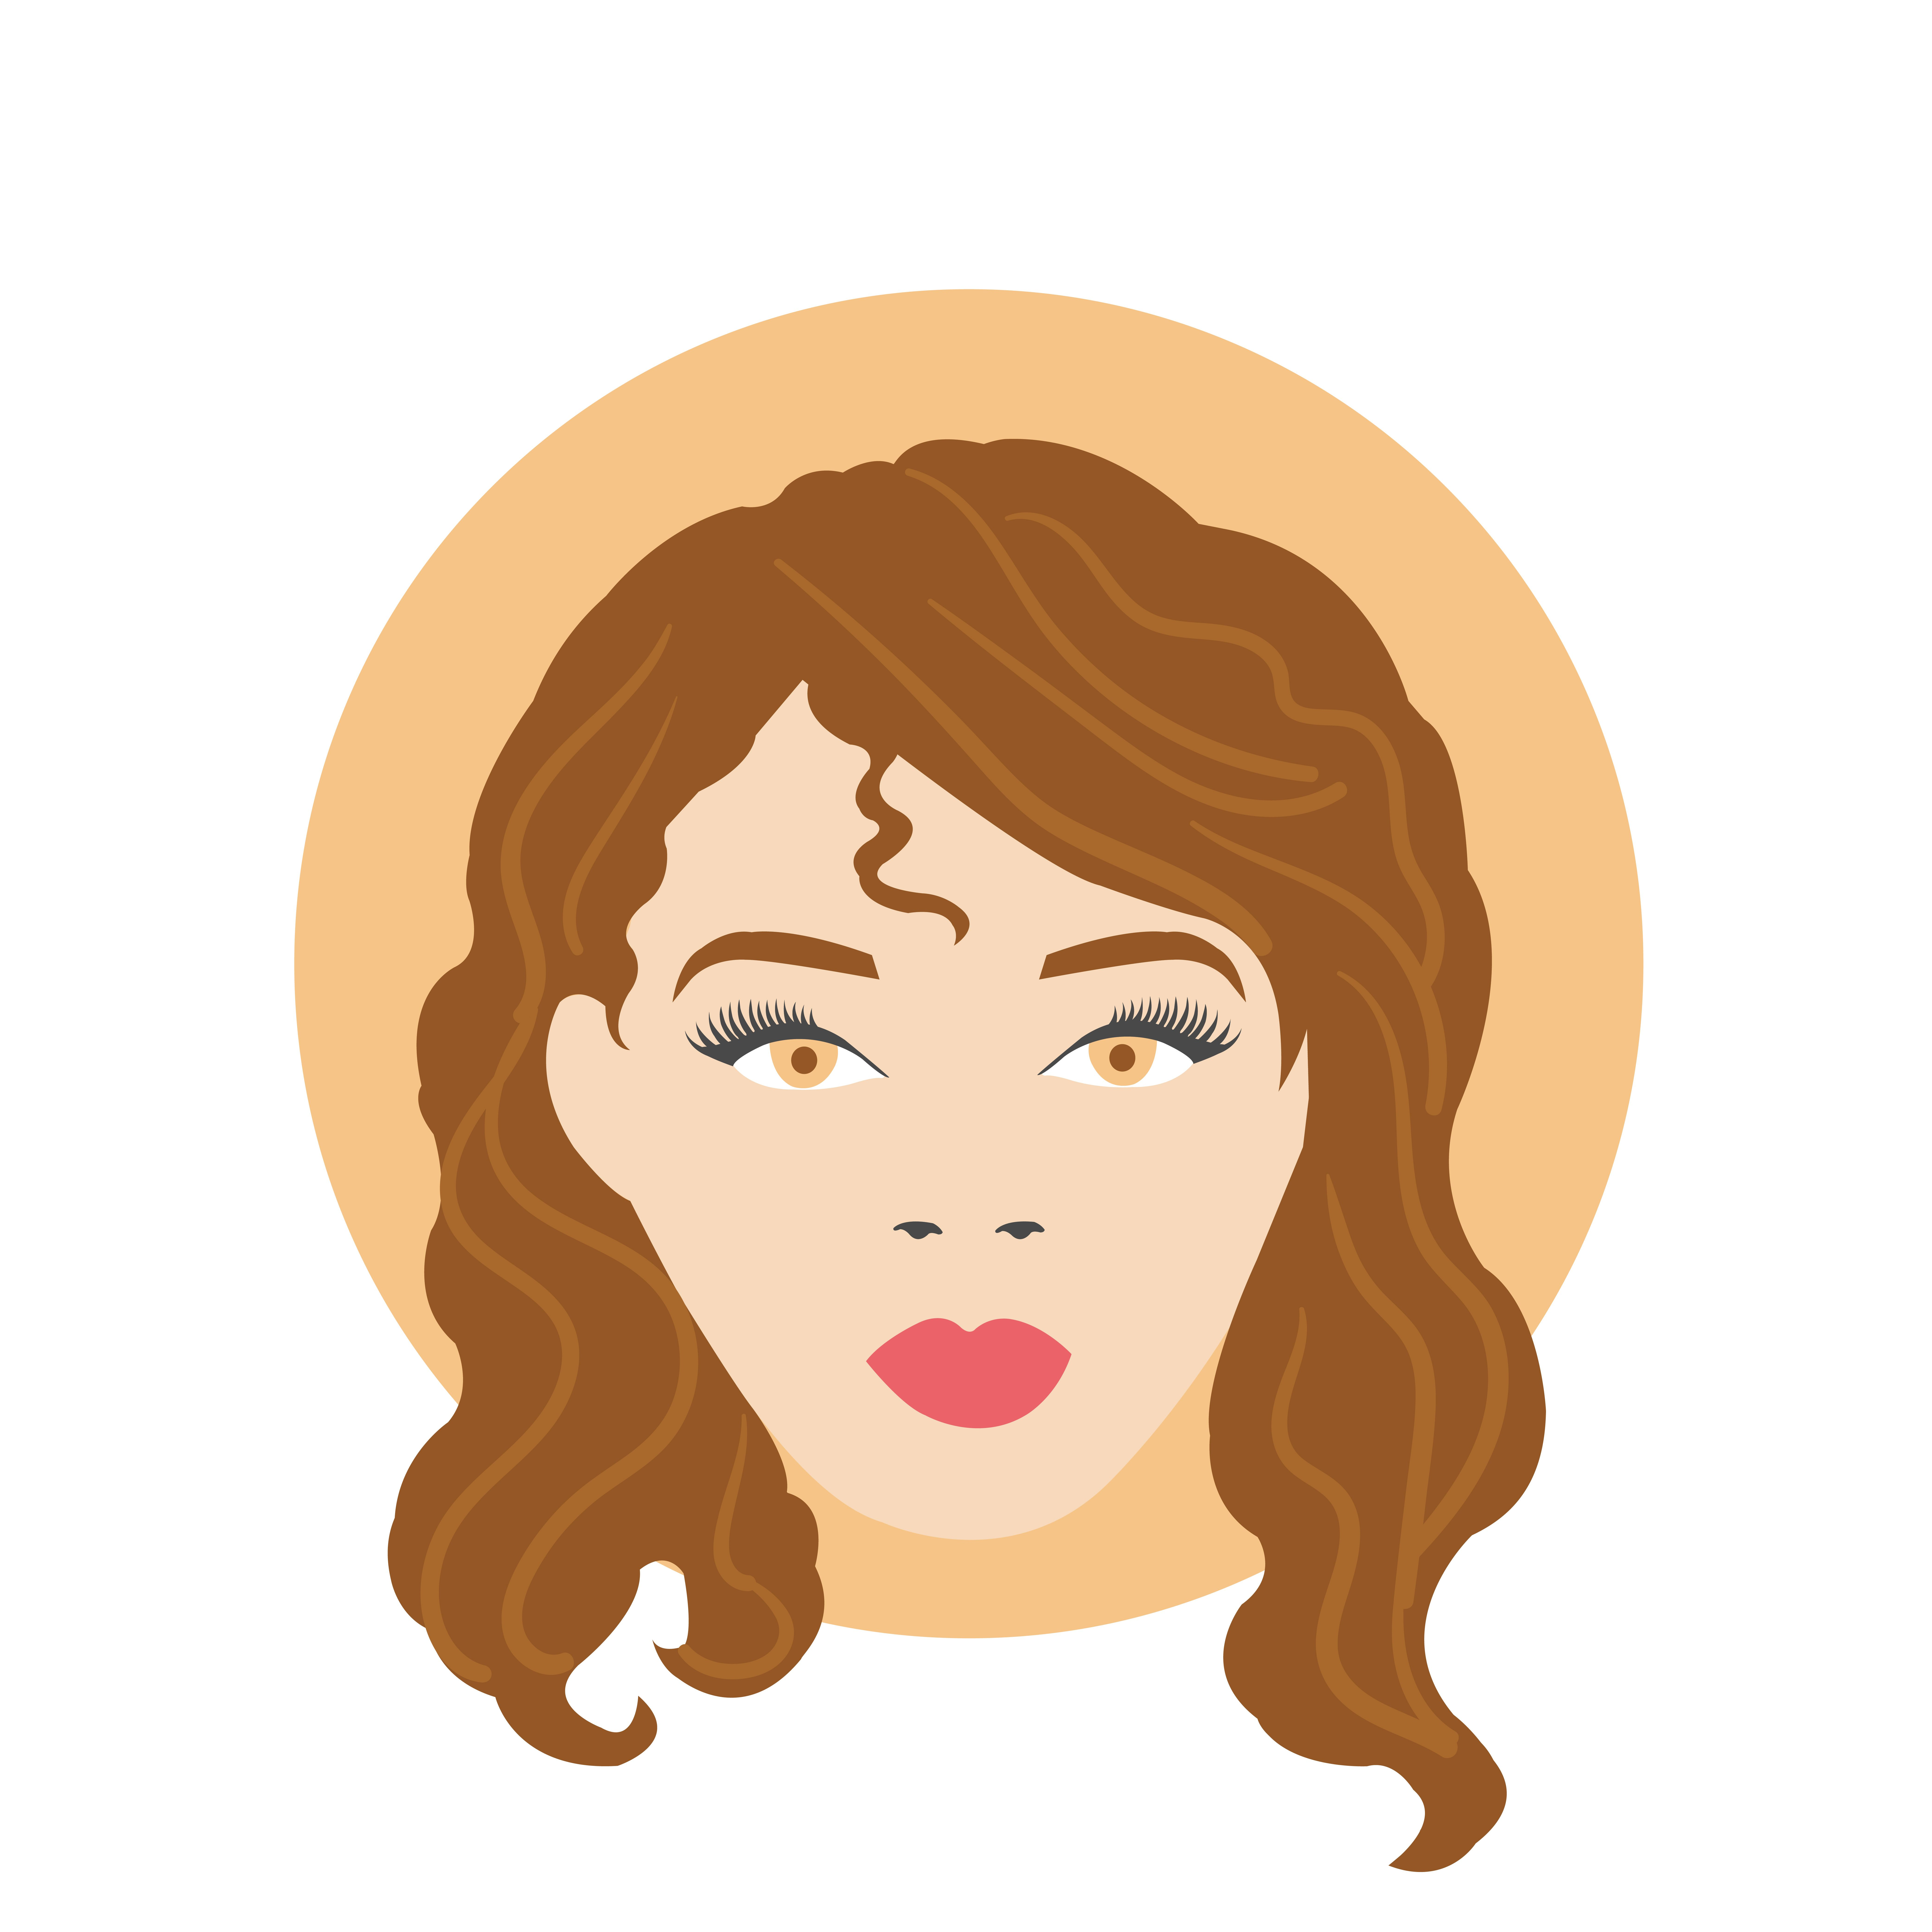 curly and straight hair clipart